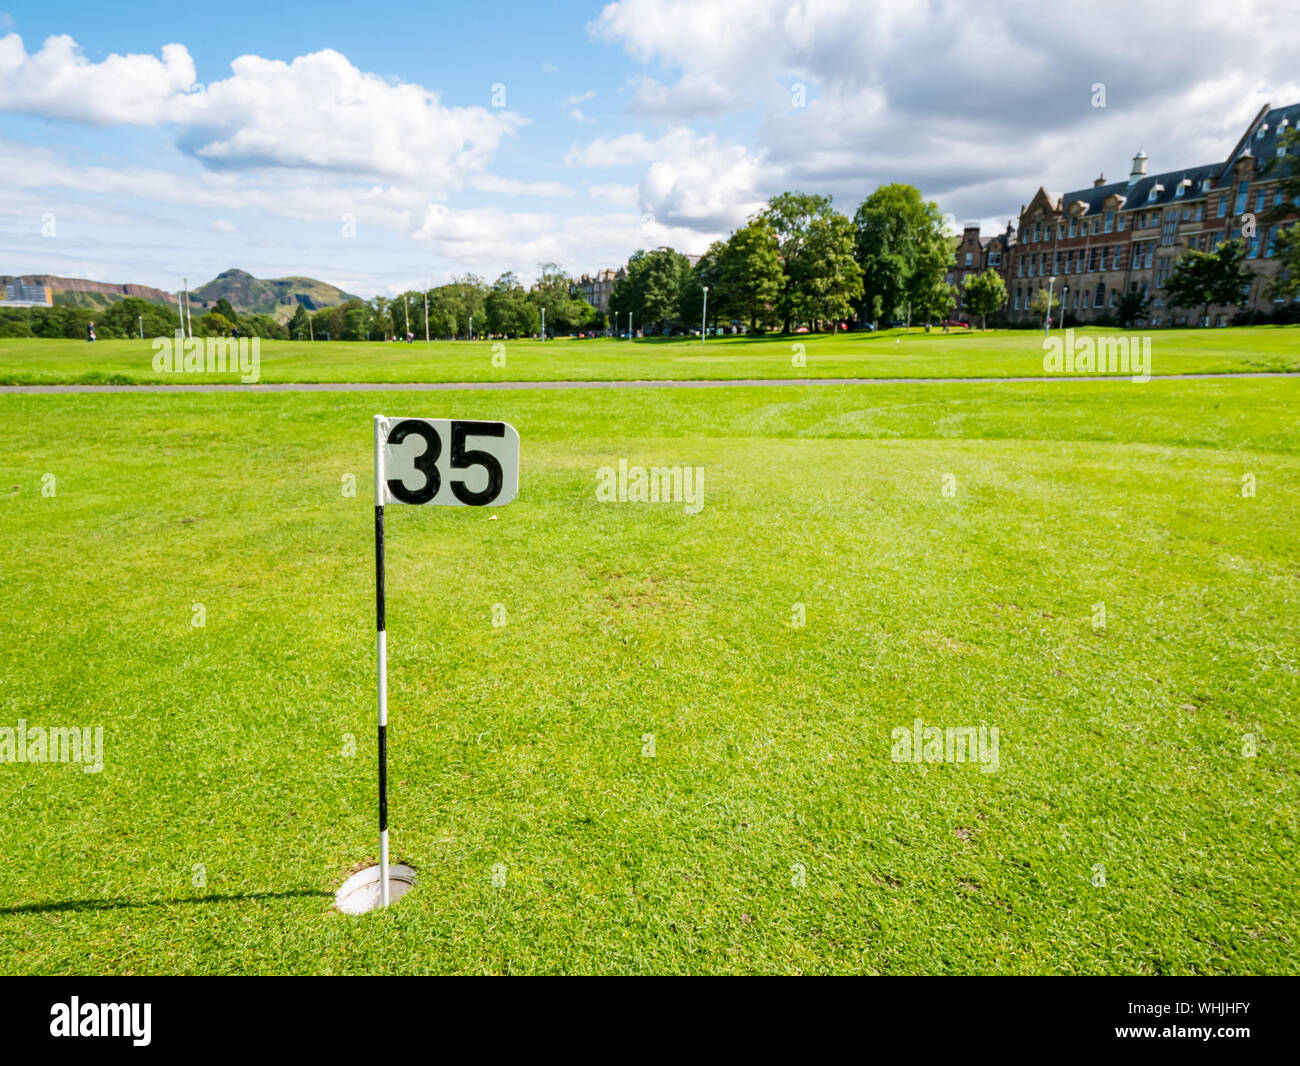 Putting green golf hole with number 35, The Meadows, Edinburgh, Scotland, UK Stock Photo